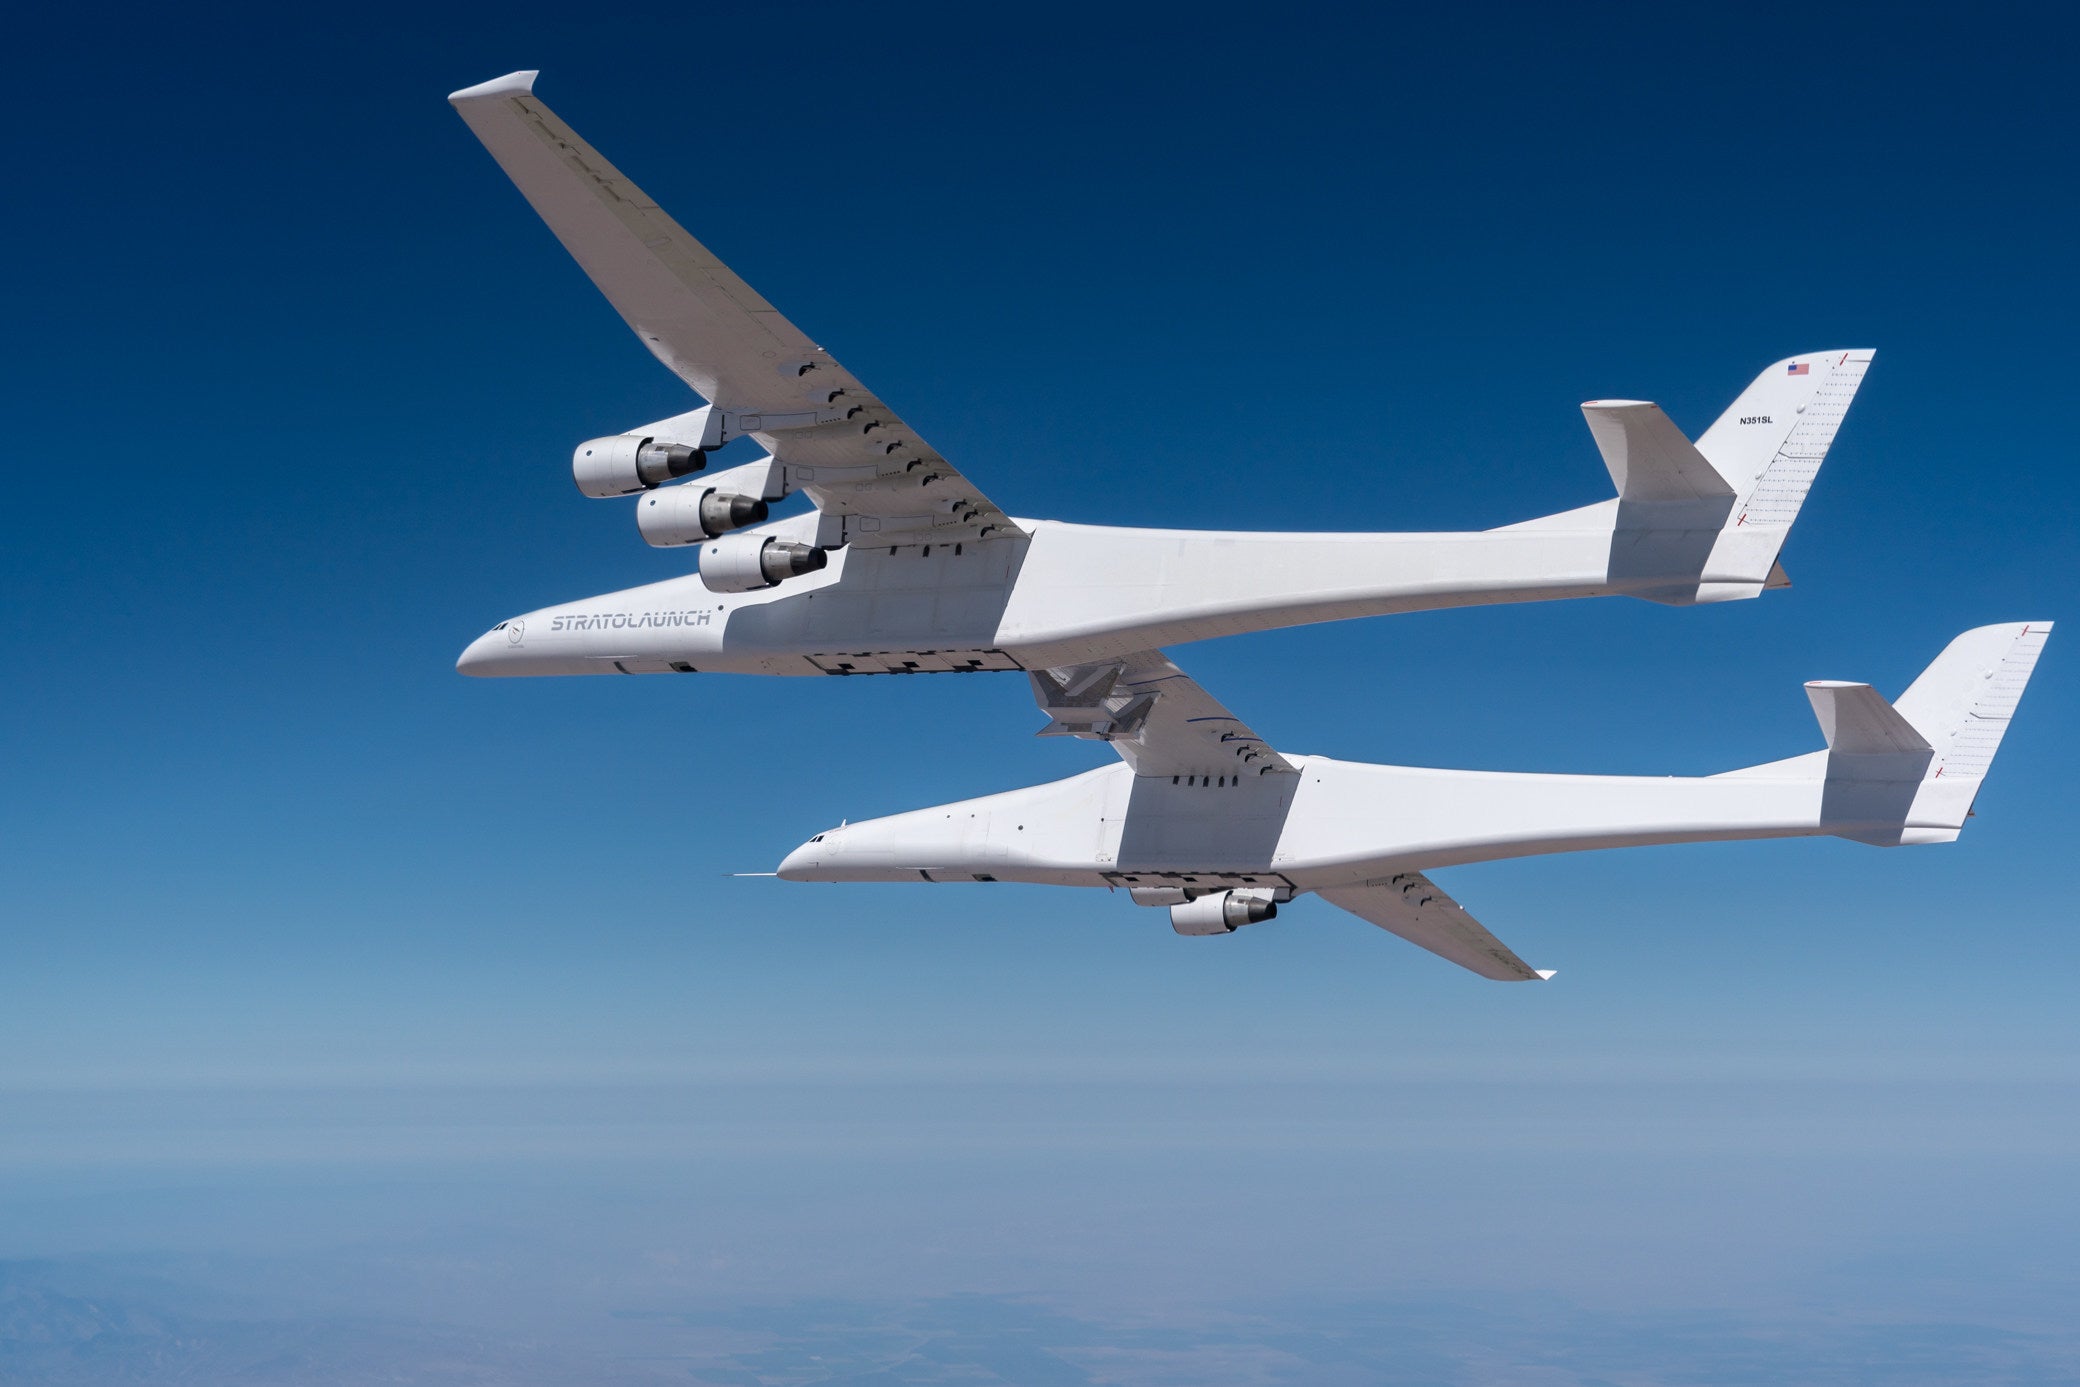 Carrier aircraft Roc during its fifth test flight on May 4, 2022.  (Photo: Stratolaunch)